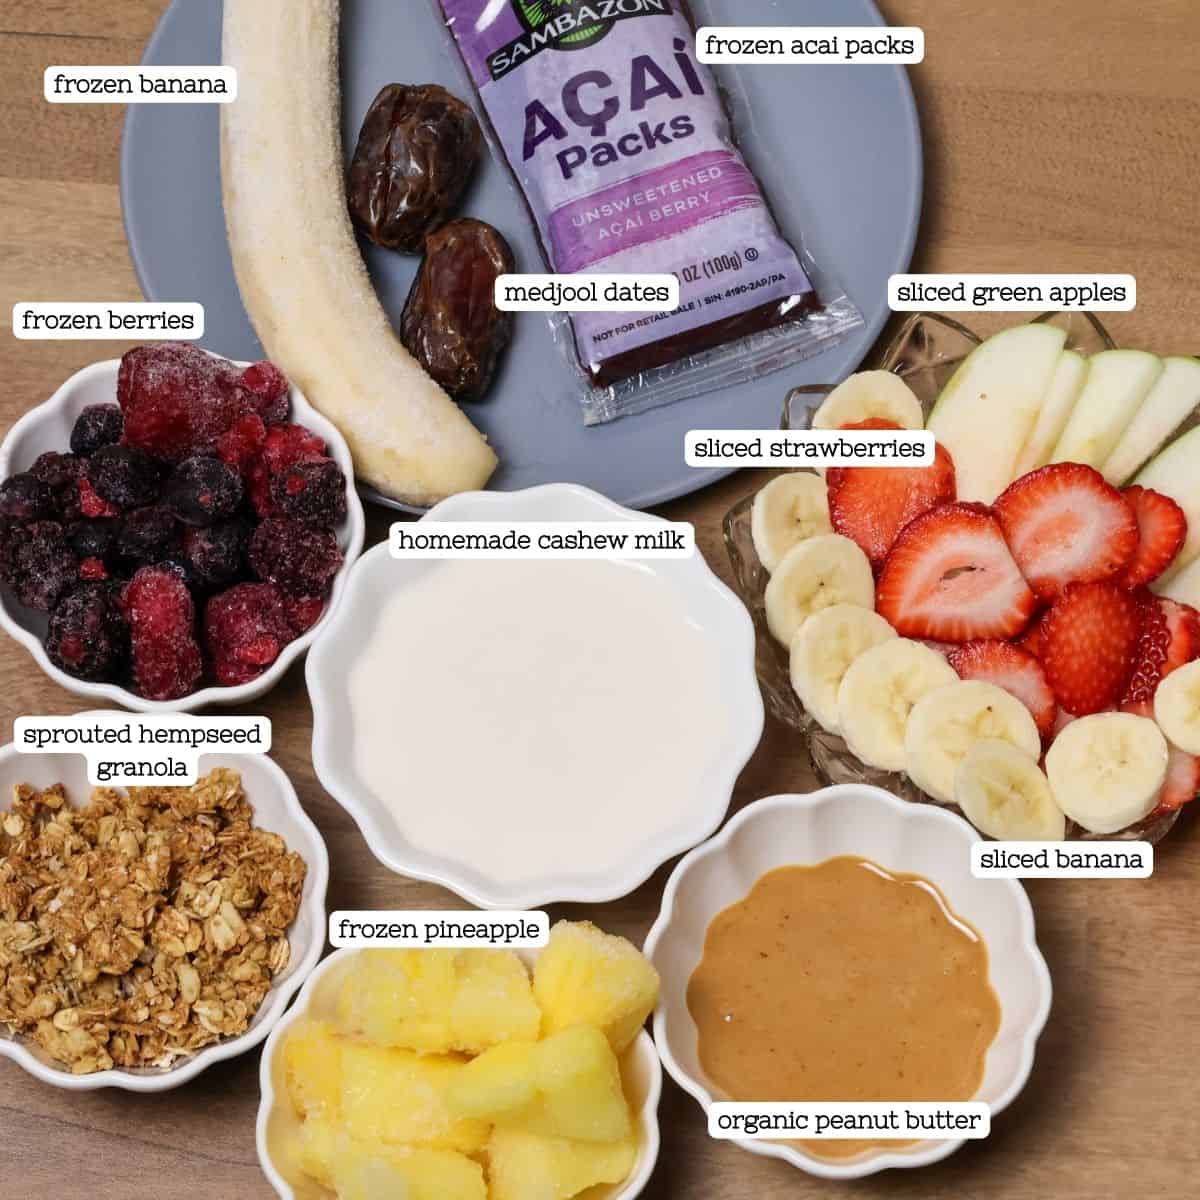 Laid out ingredients for an acai peanut butter bowl including frozen banana, berries, acai packs, green apples, strawberries, granola, frozen pineapple, cashew milk, and peanut butter.